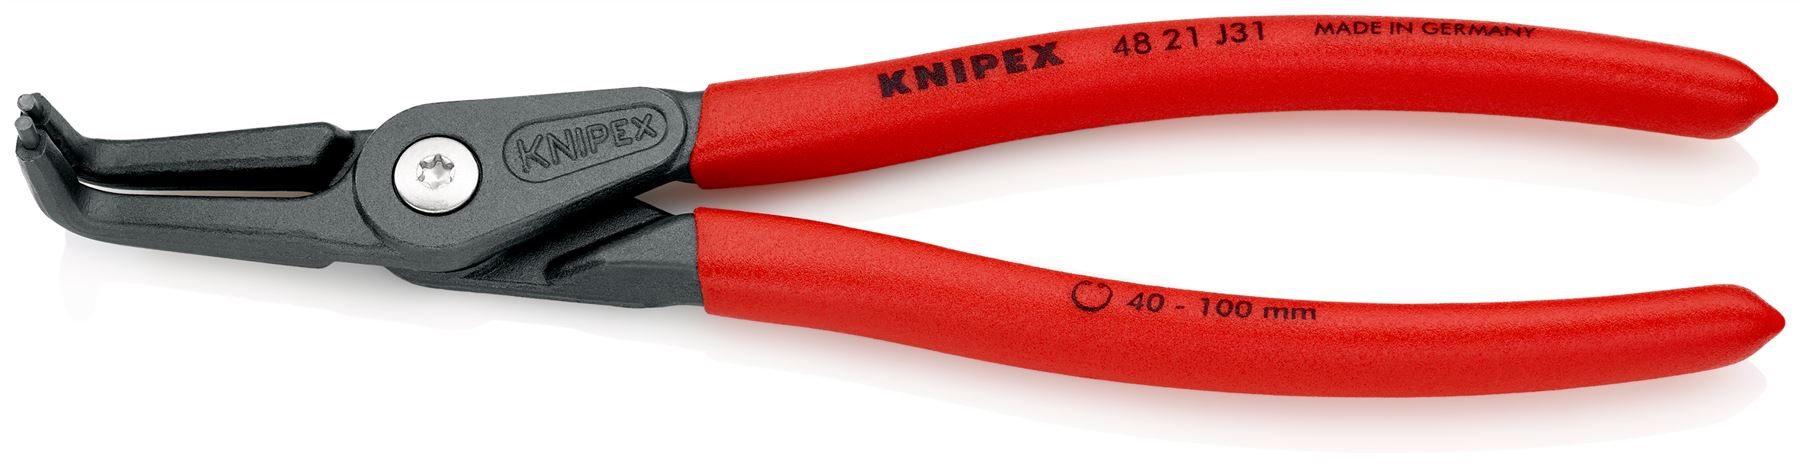 KNIPEX Precision Circlip Pliers for Internal Circlips in Bore Holes 90° Angled 210mm 2.3mm Diameter Tips 40 21 J31